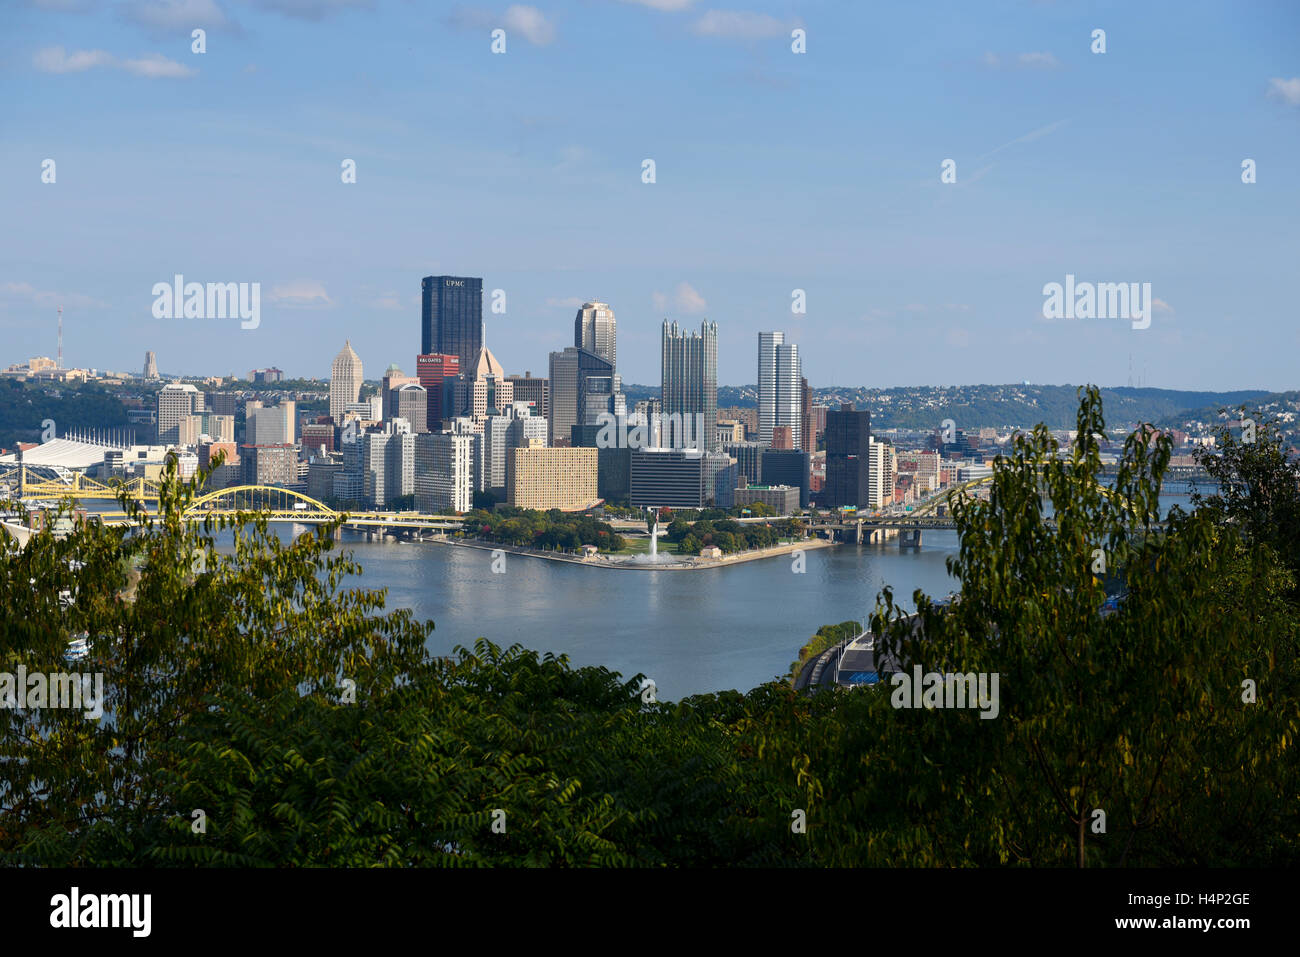 USA Pittsburgh PA Pennsylvania skyline at the confluence of Allegheny Monongahela and Ohio Rivers daytime Stock Photo